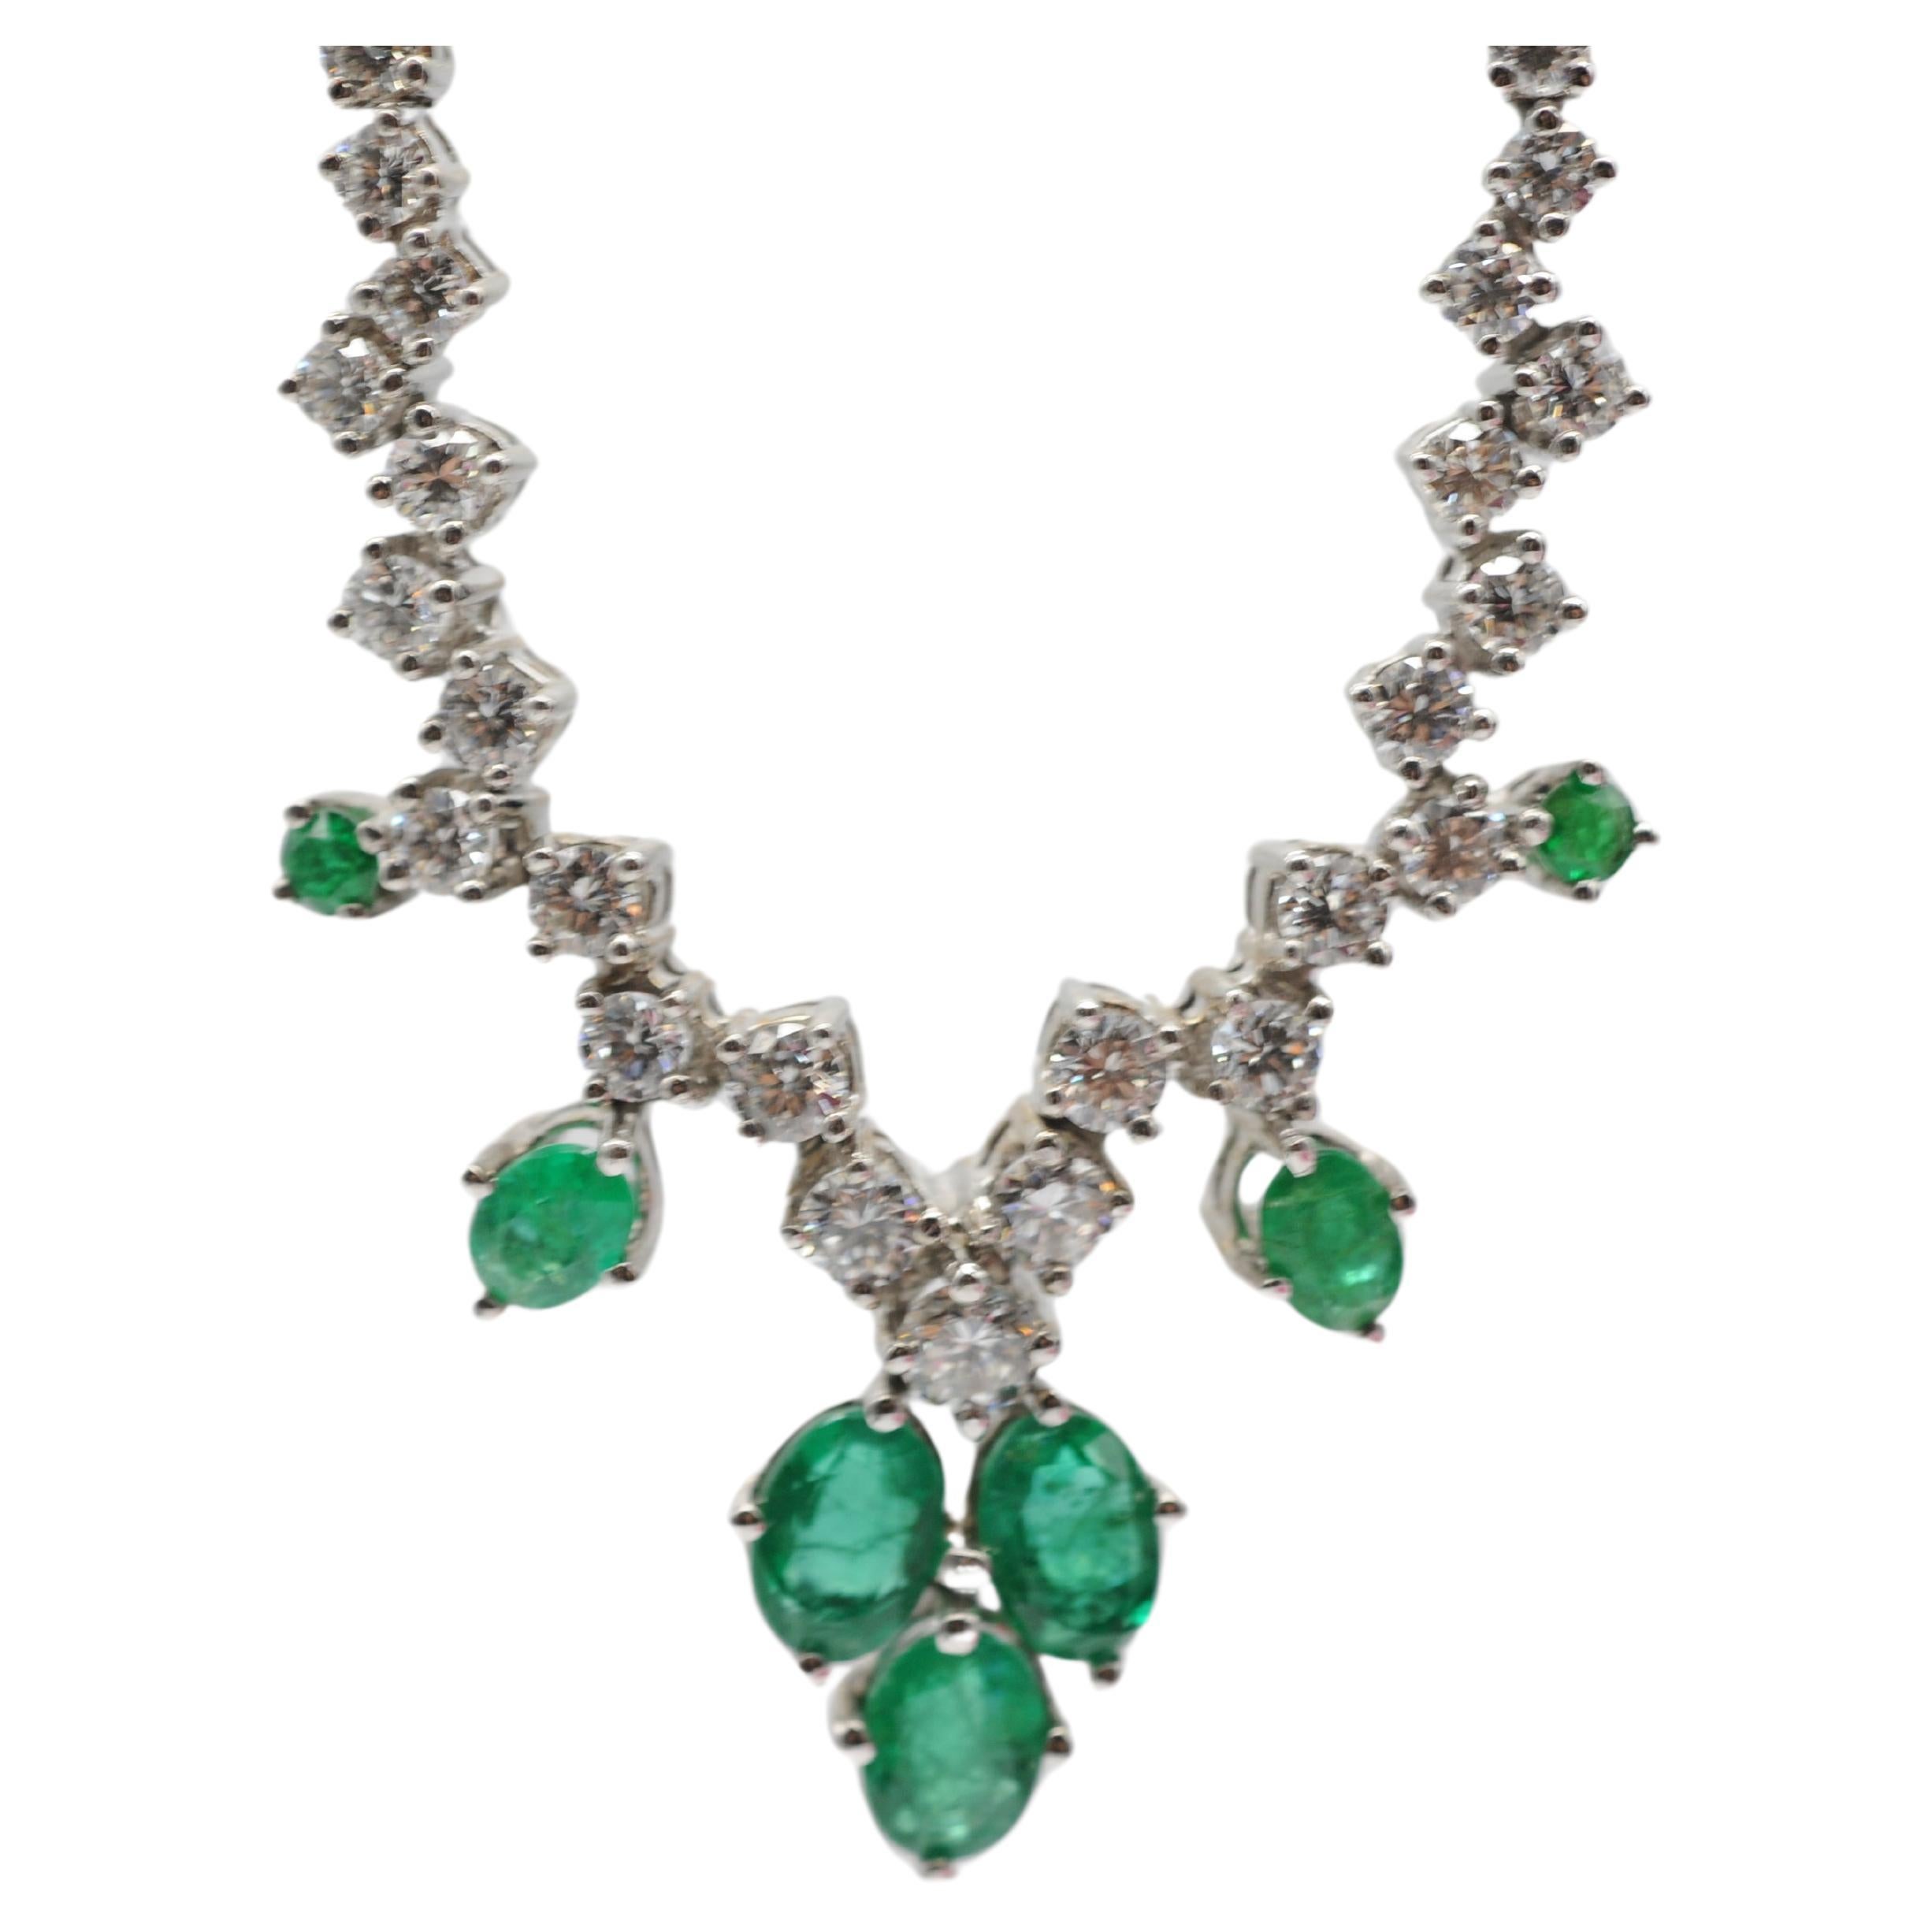 Exquisite 18k White Gold Necklace emeralds and diamonds For Sale 2